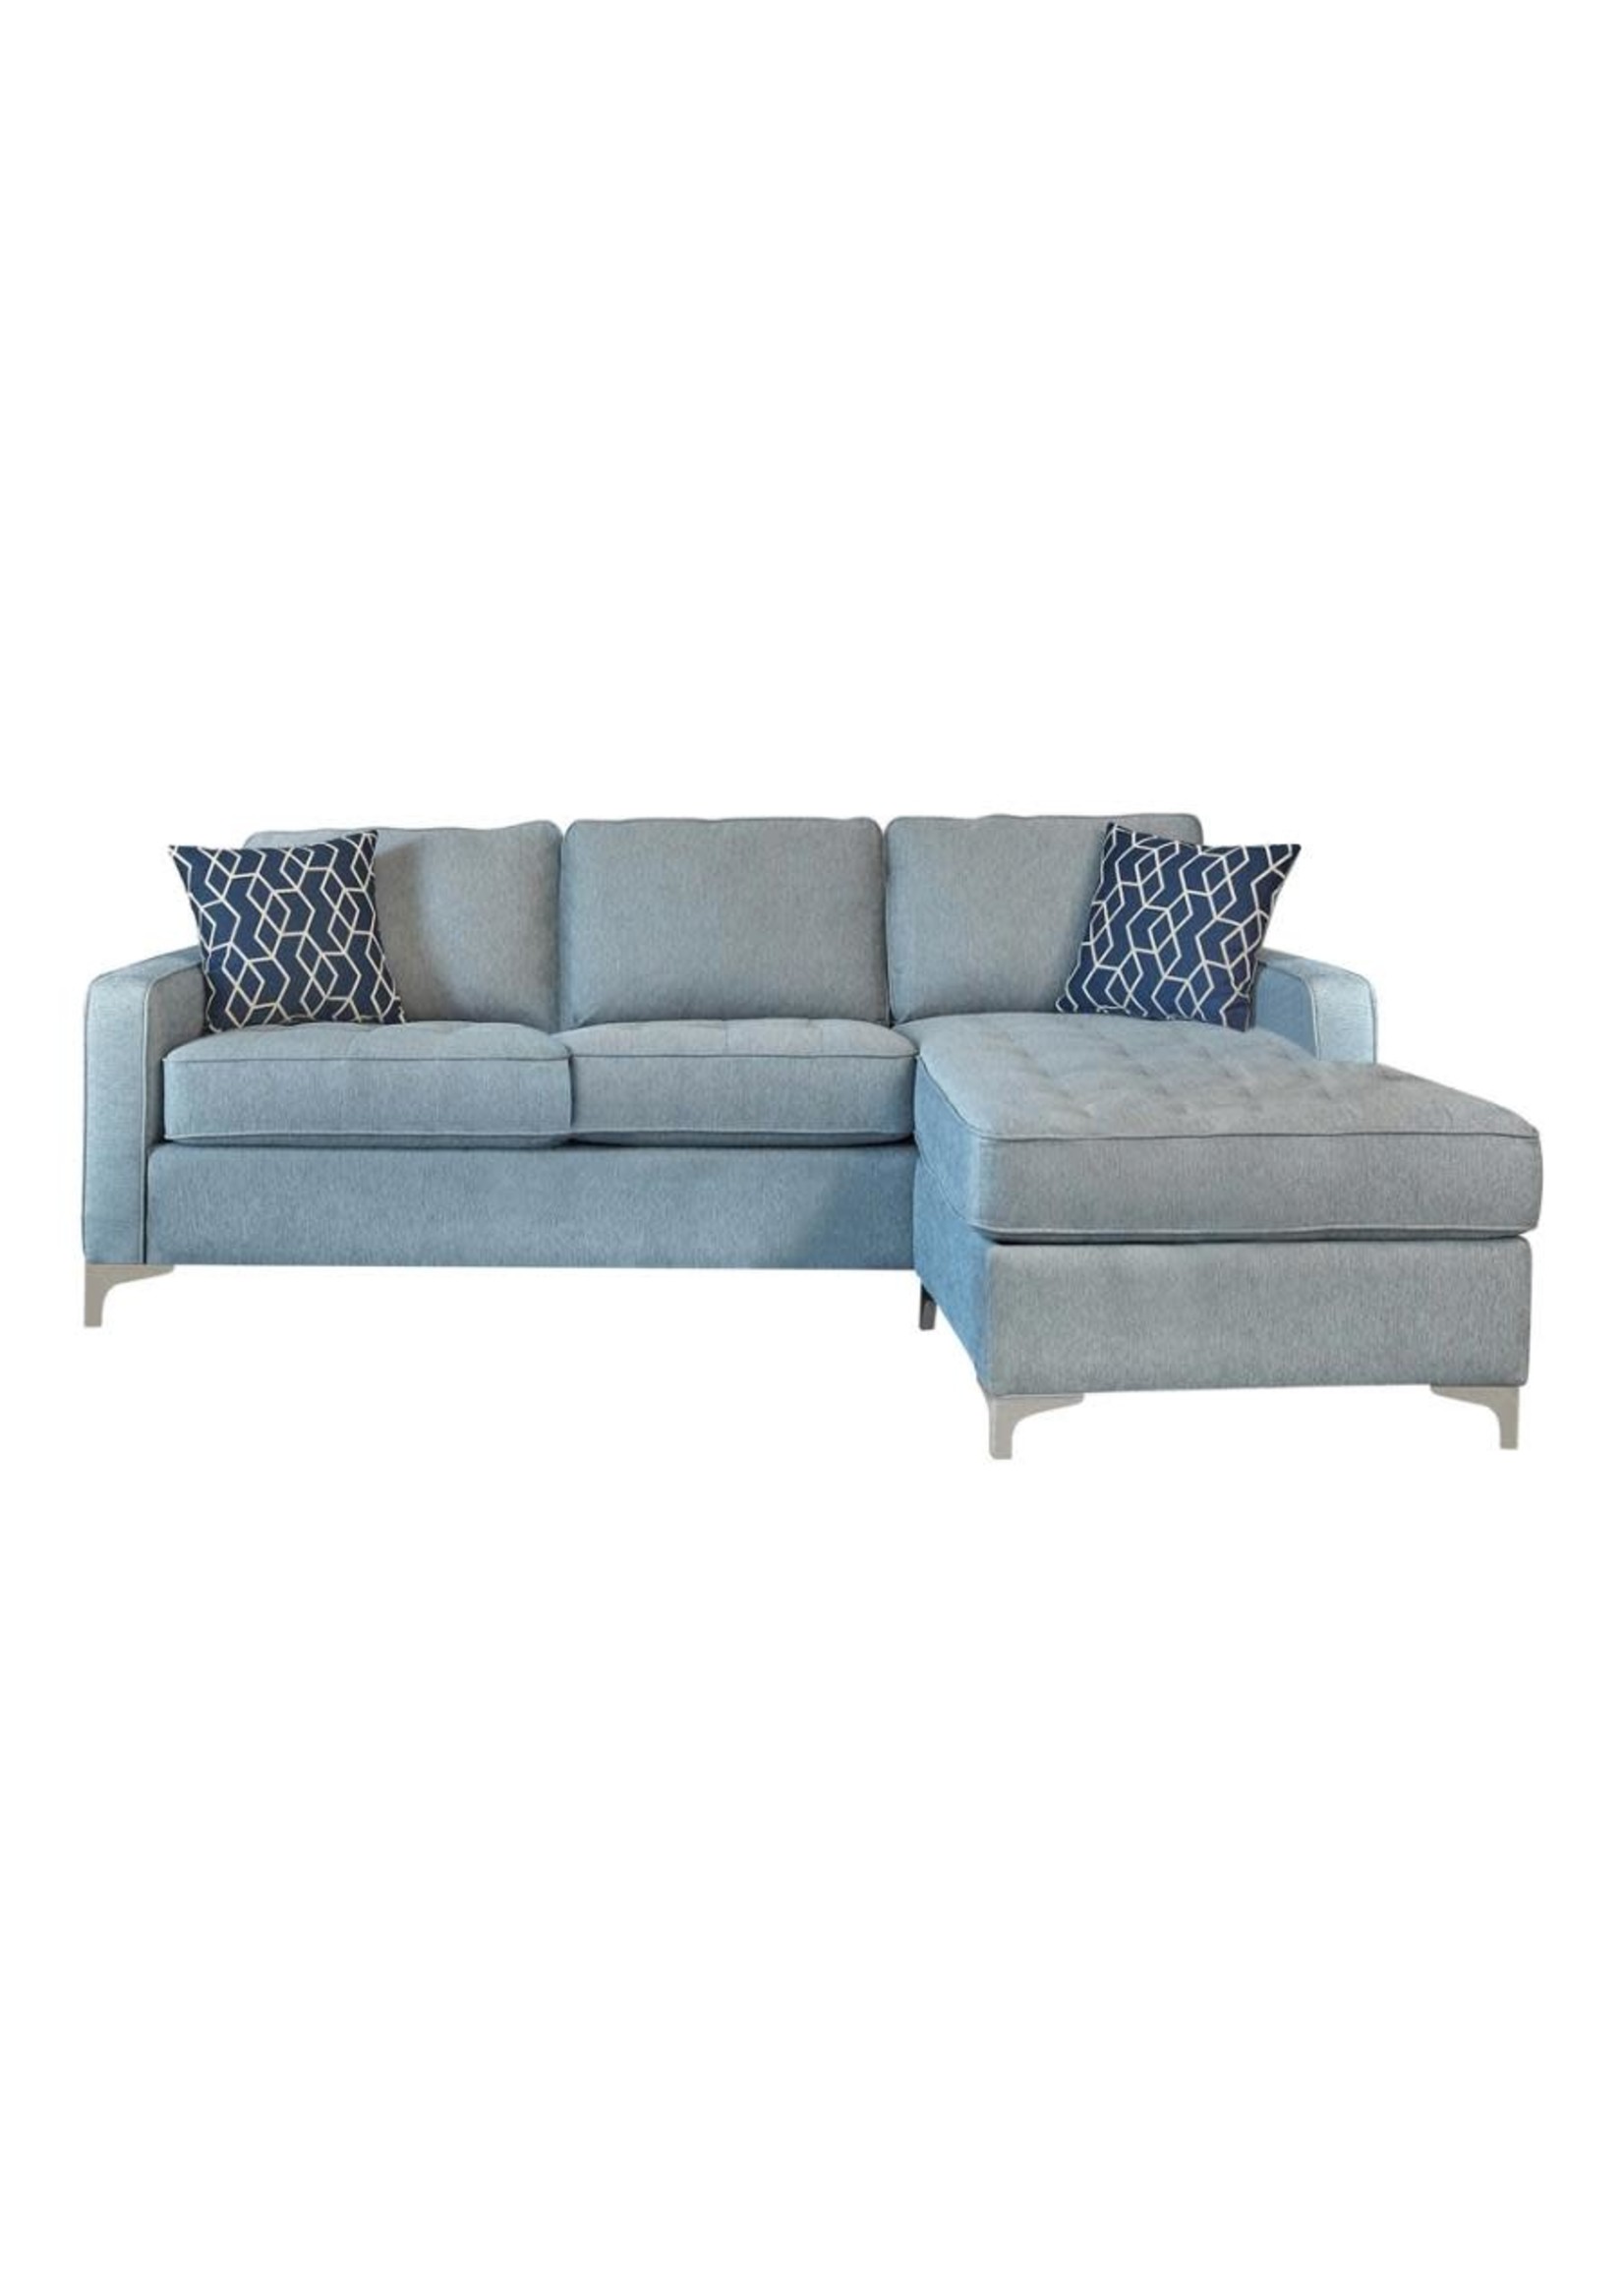 Coaster Furniture 509327 Sectional Baby Blue 92.5x62.5x34.75